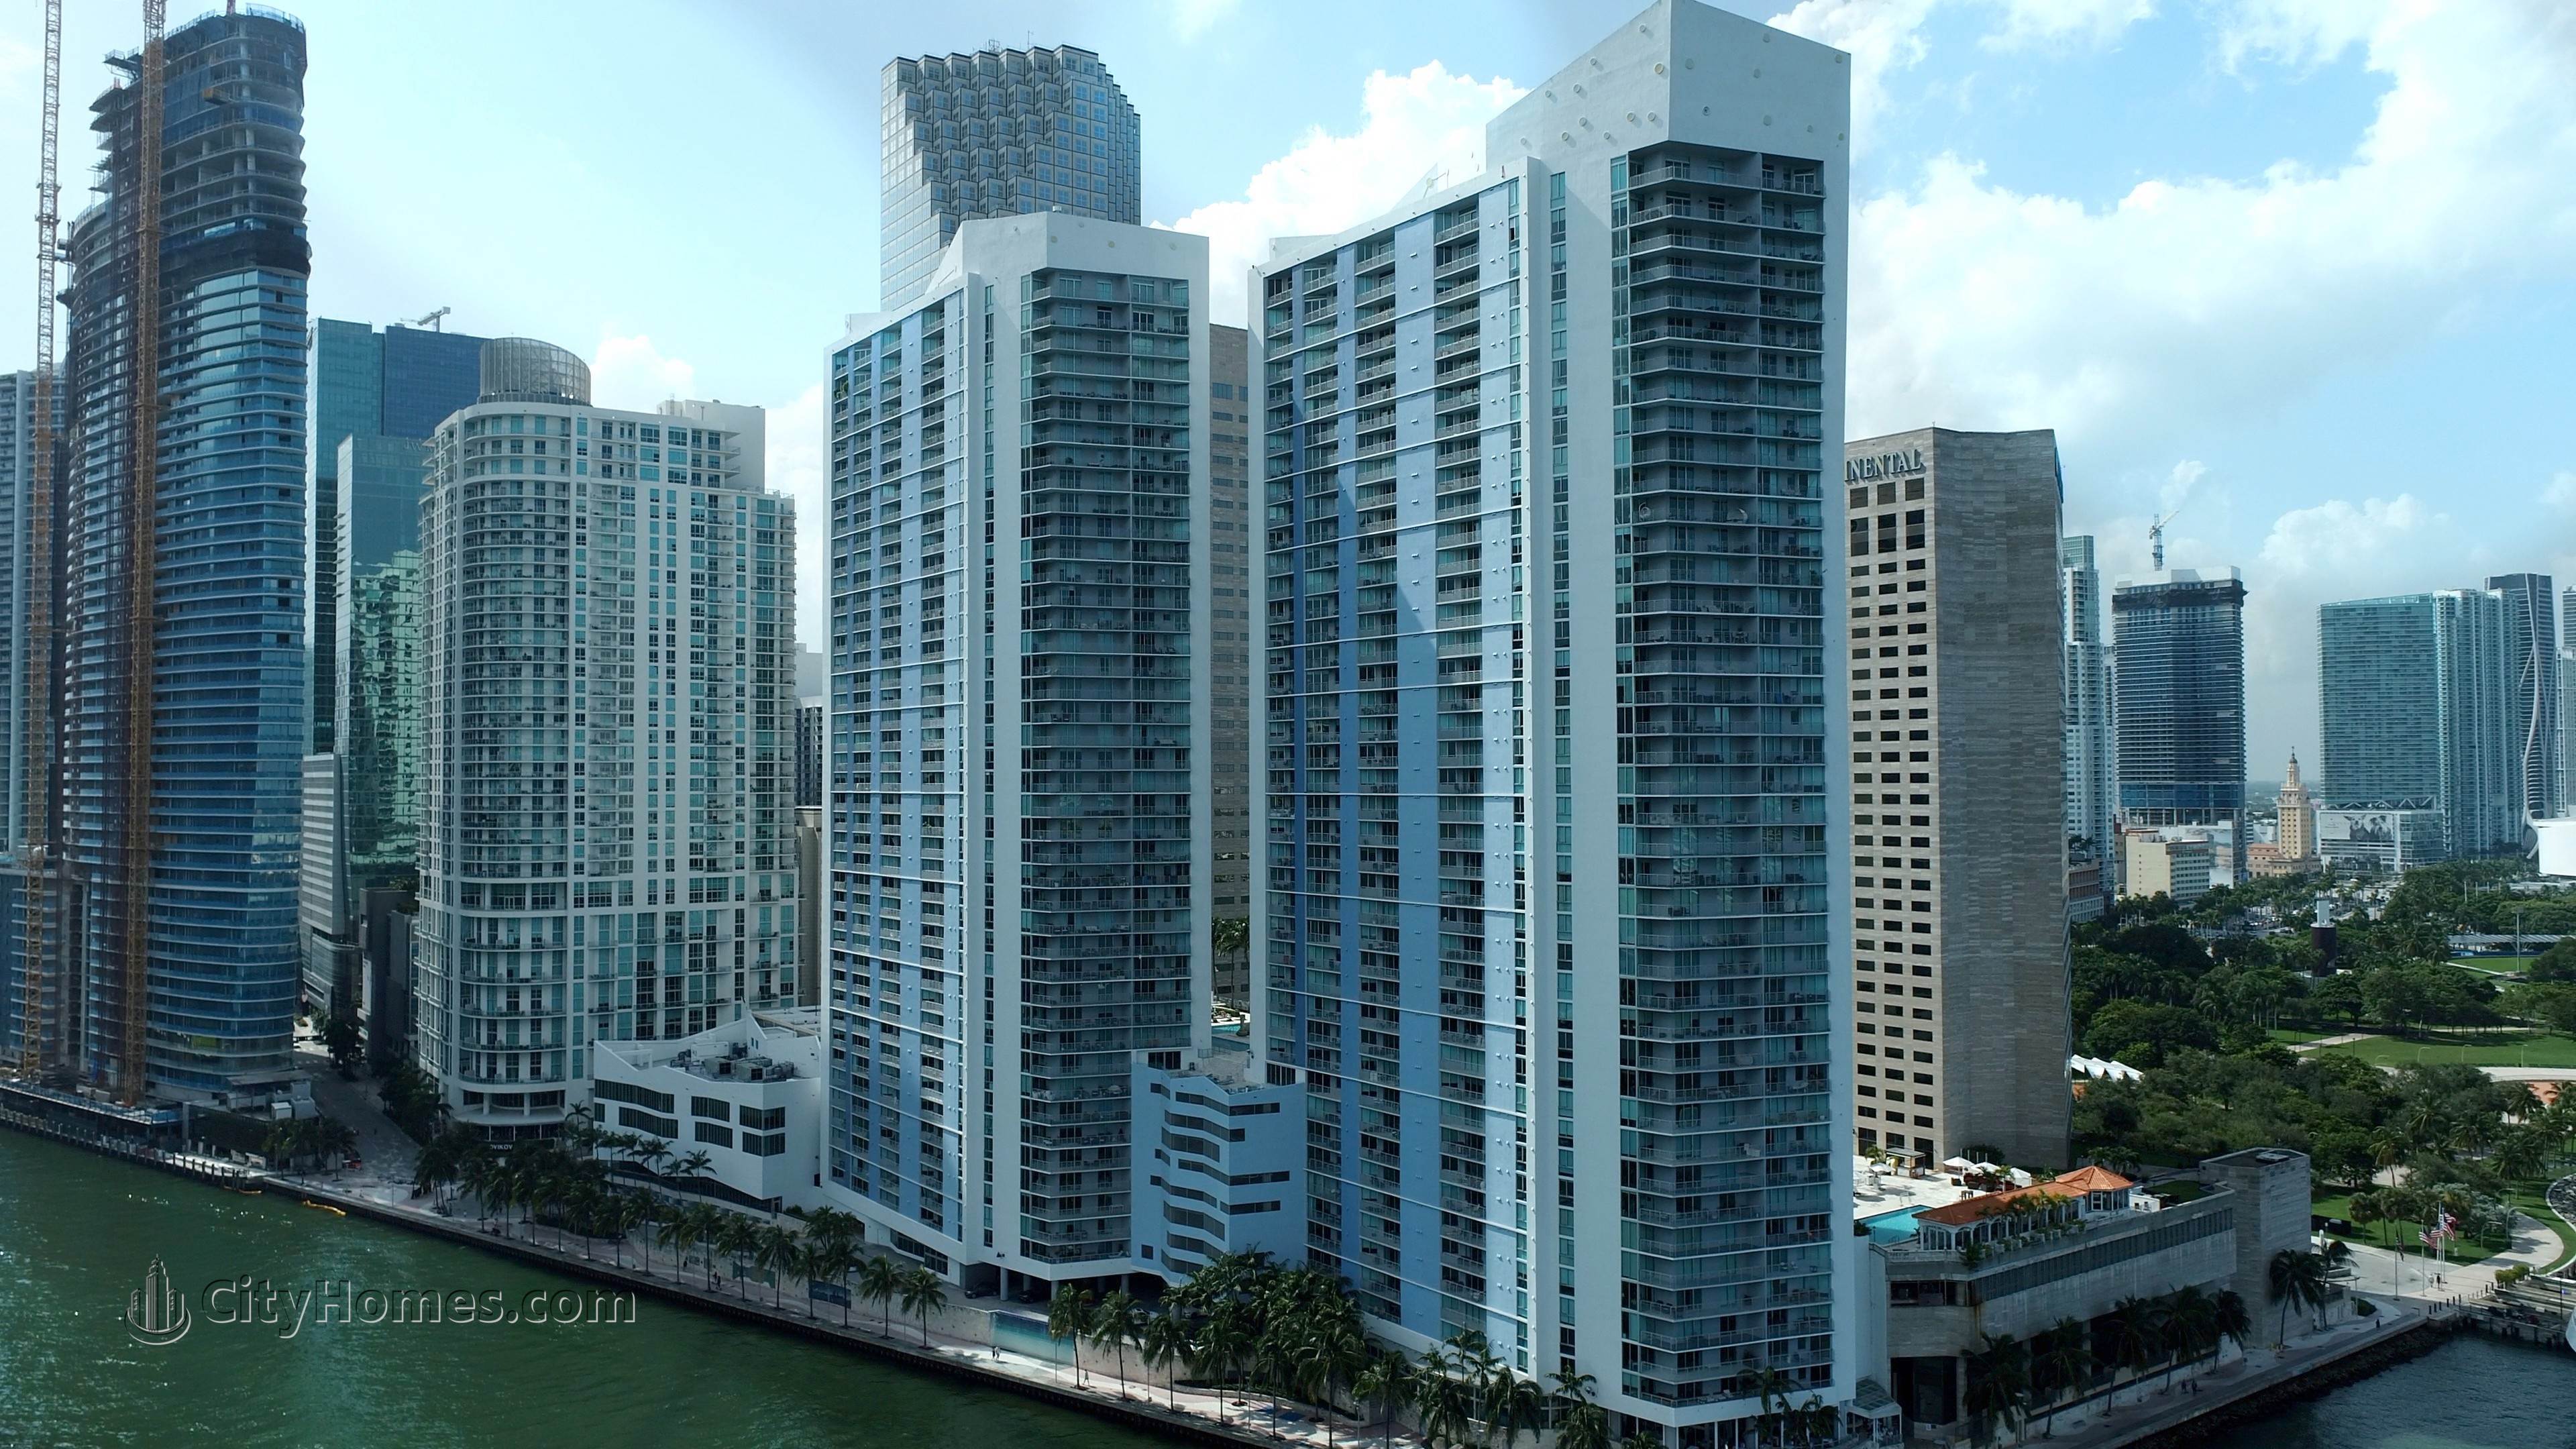 2. One Miami building at 325 And 335 S Biscayne Blvd, Miami, FL 33131